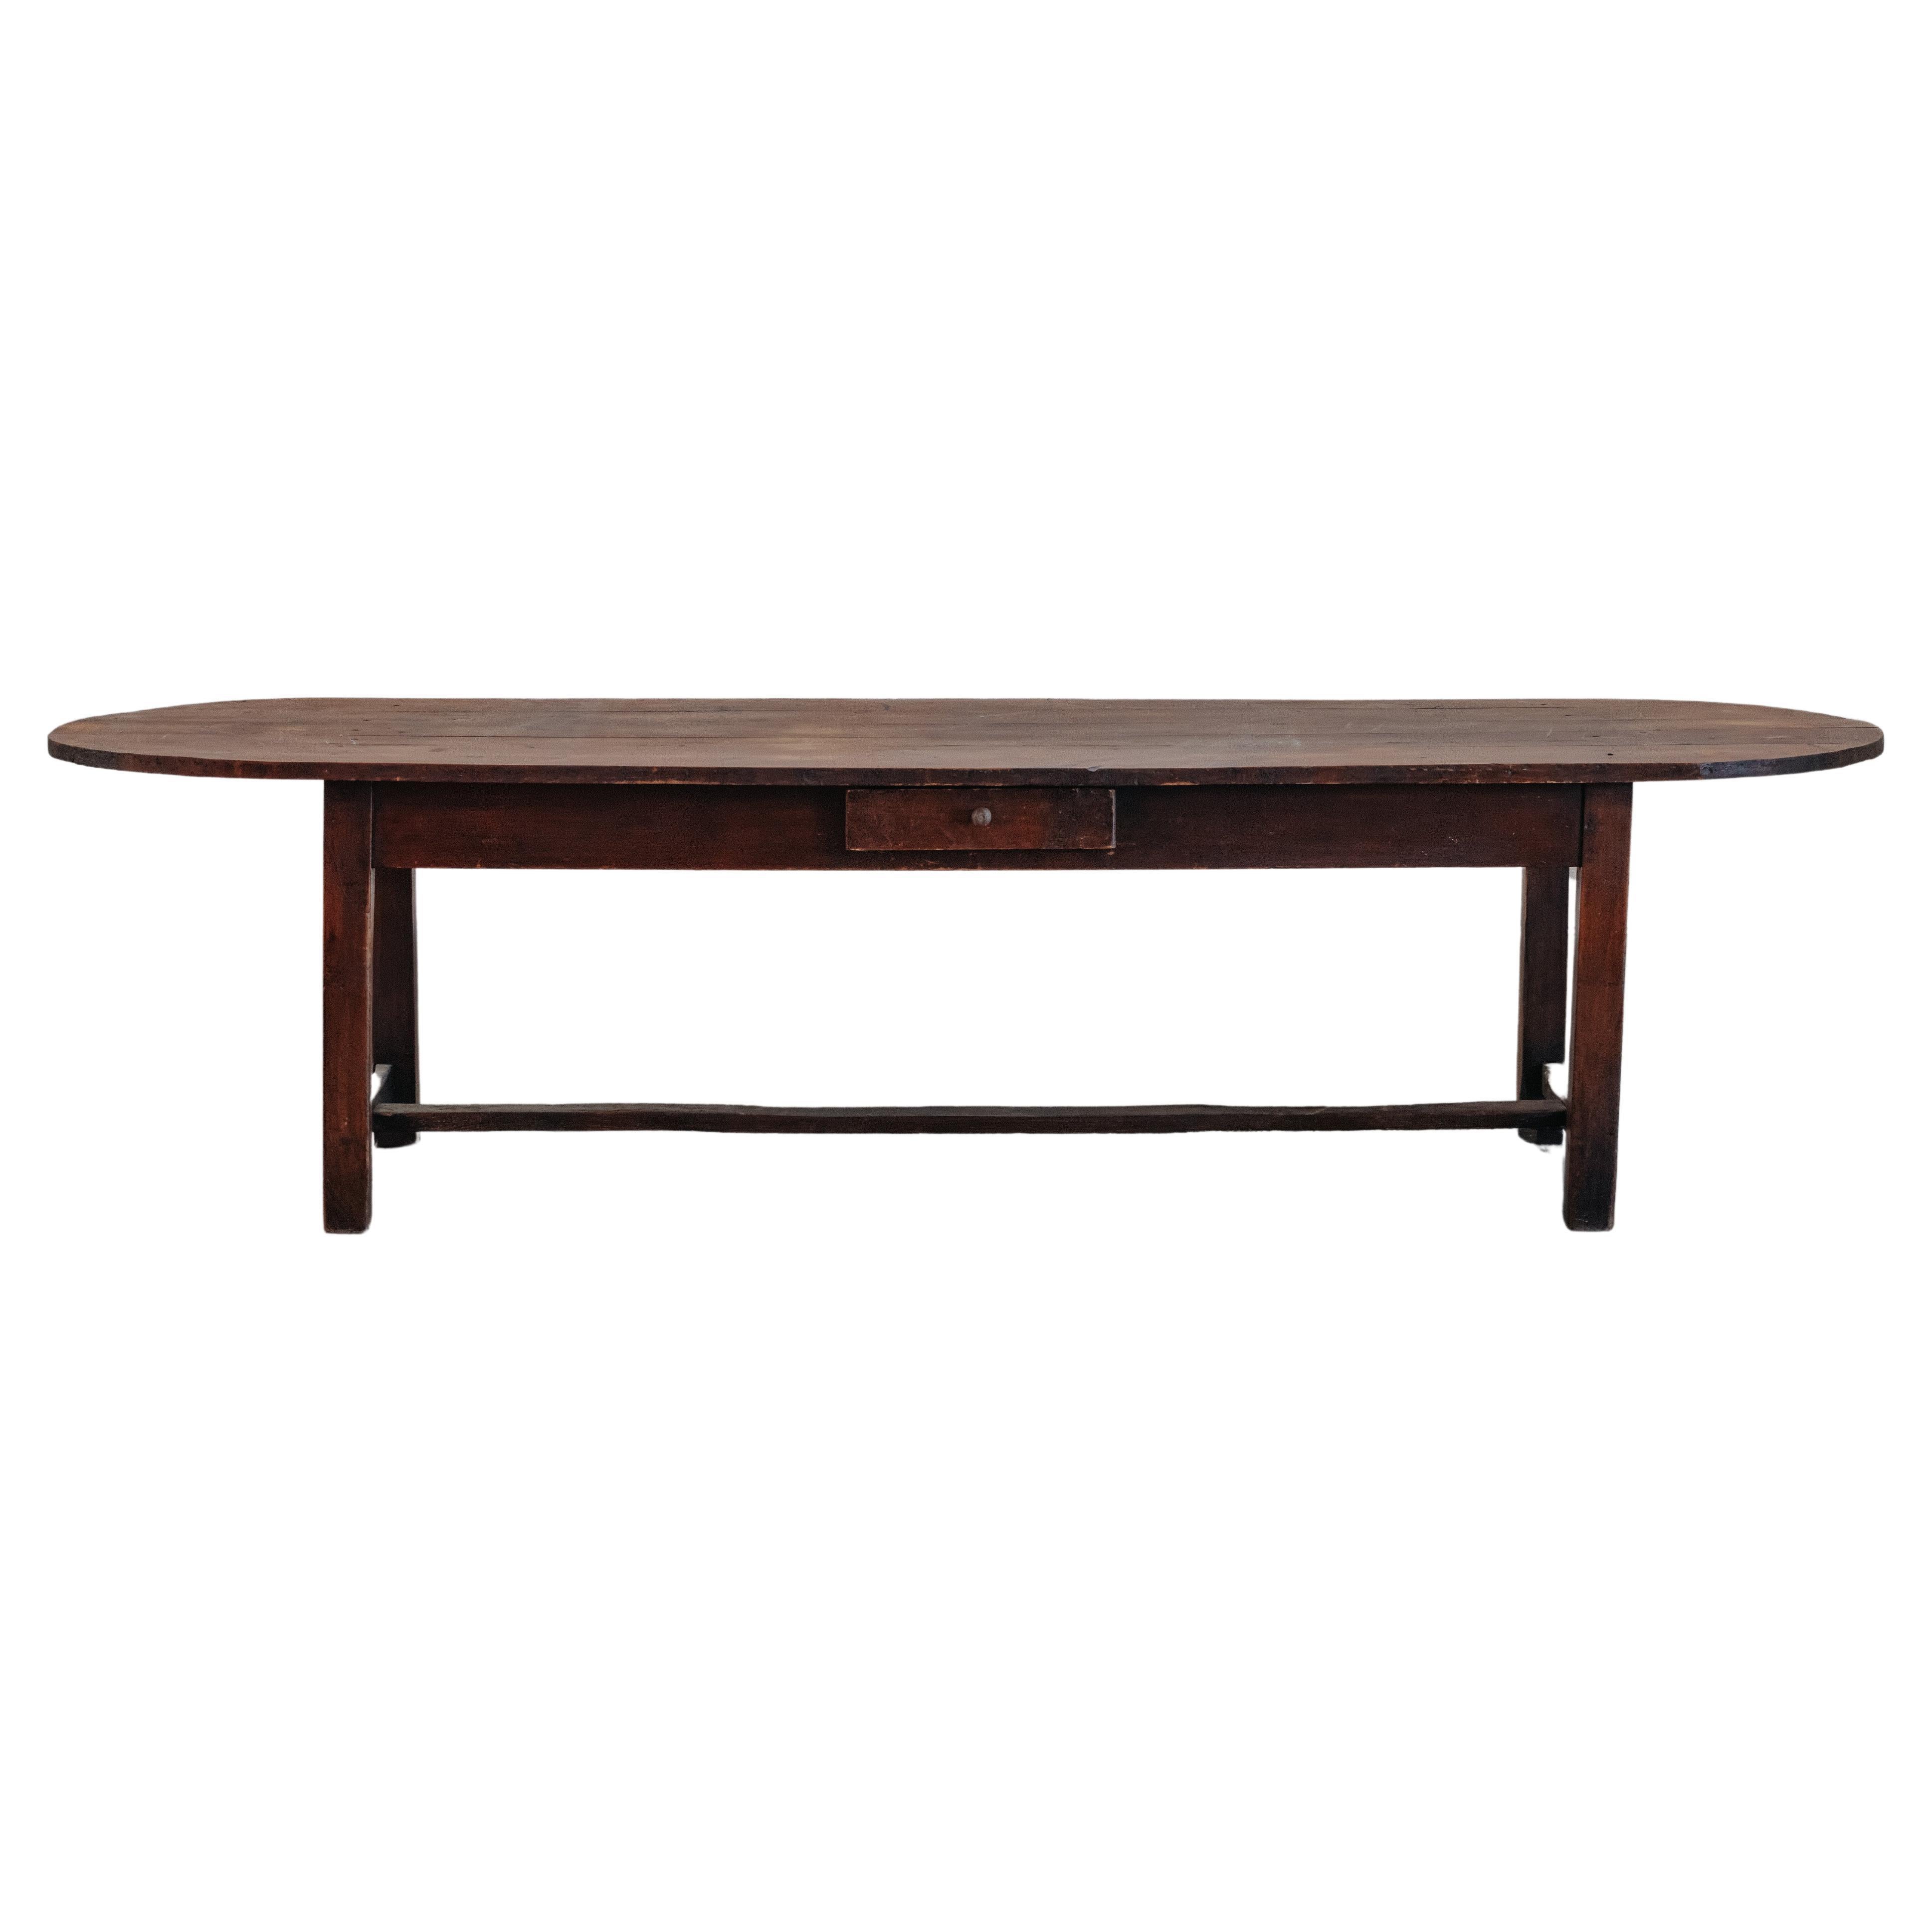 Large Pine Farm Table From France, Circa 1900